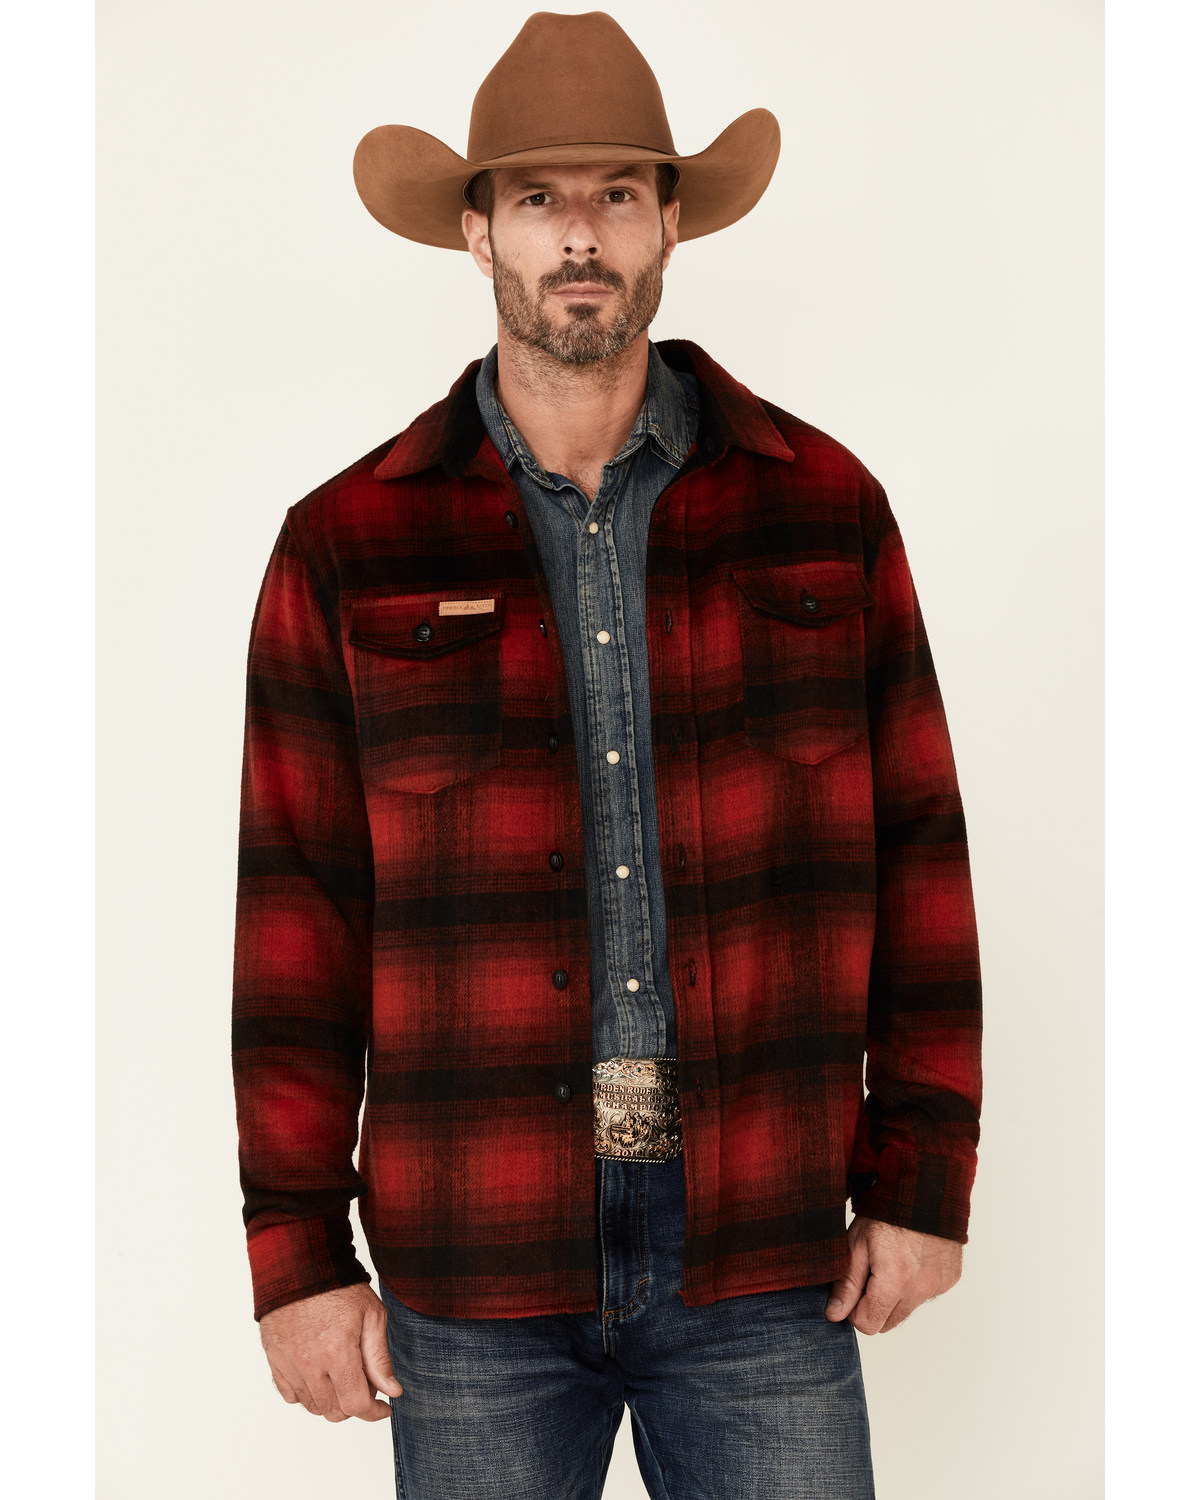 Powder River Outfitters Men's Red Ombre Plaid Wool Button-Front Shirt Jacket